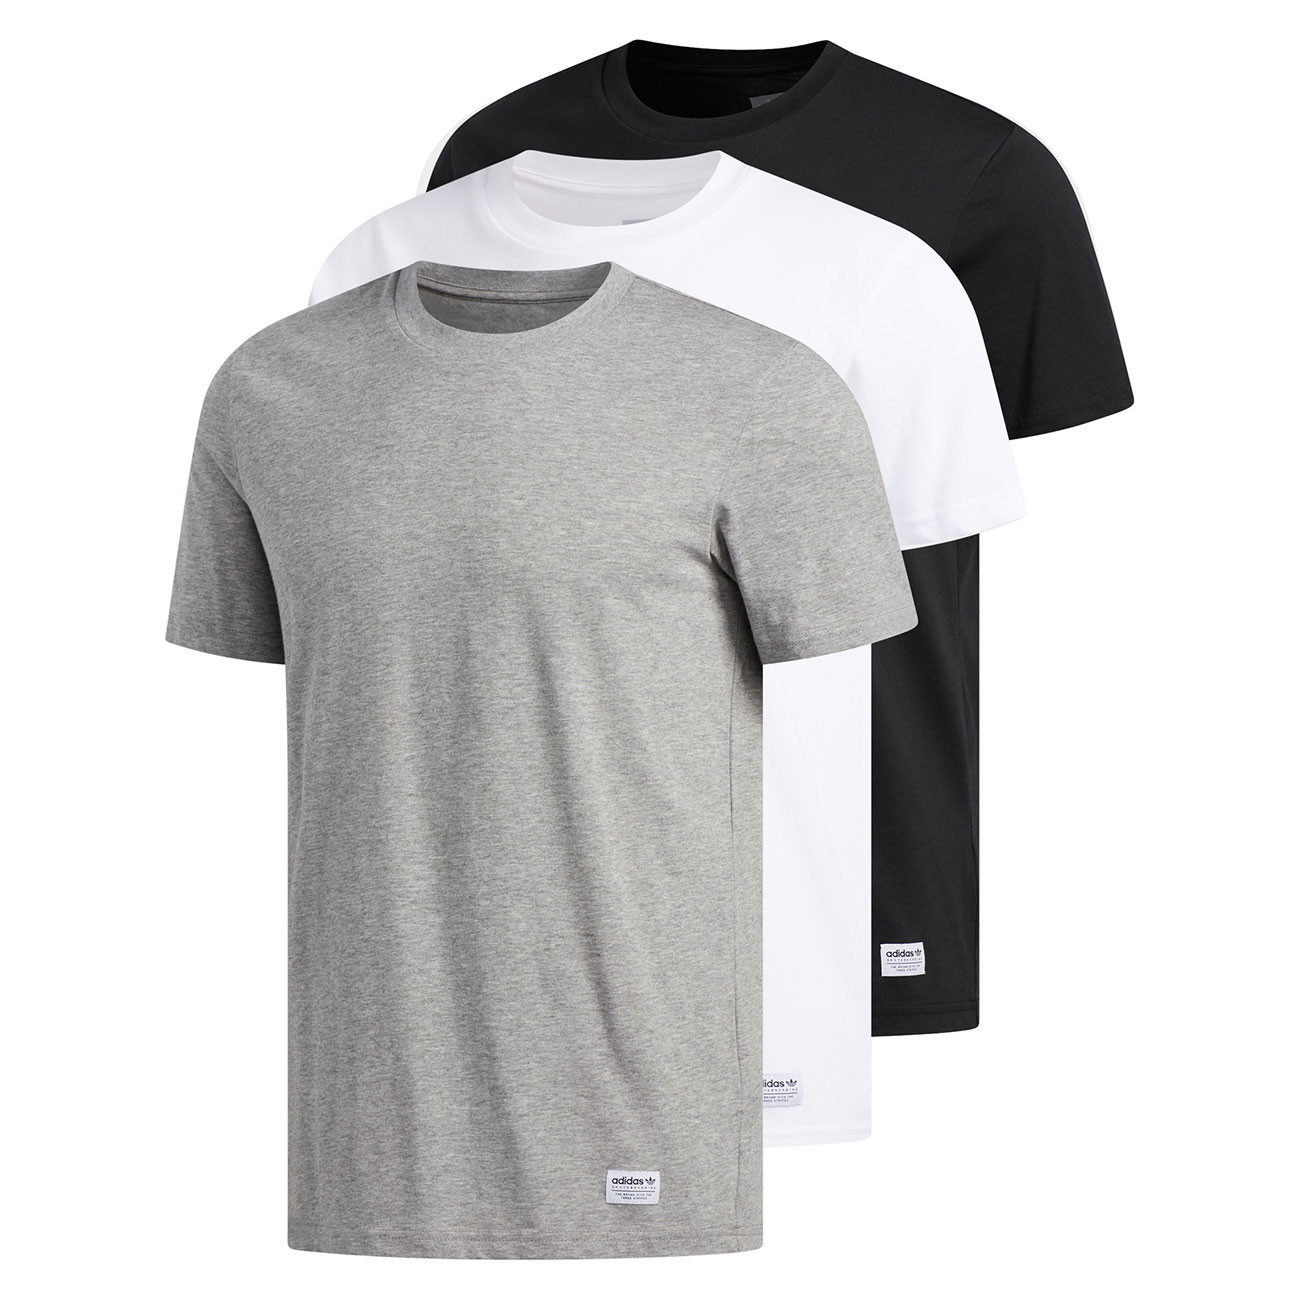 pack of adidas t shirts